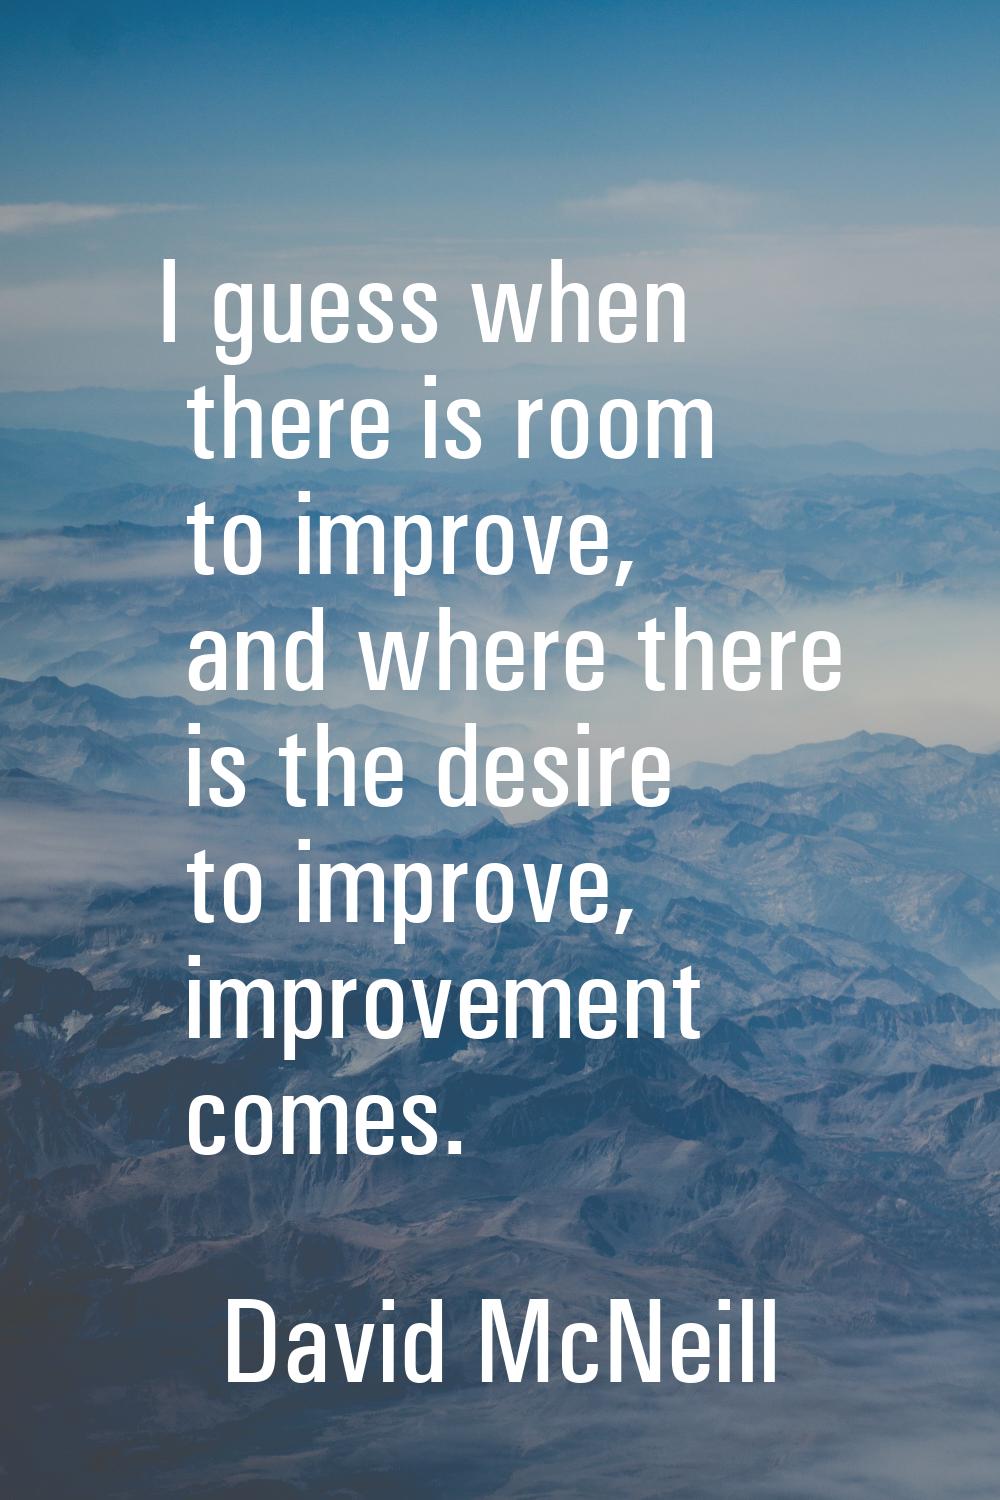 I guess when there is room to improve, and where there is the desire to improve, improvement comes.